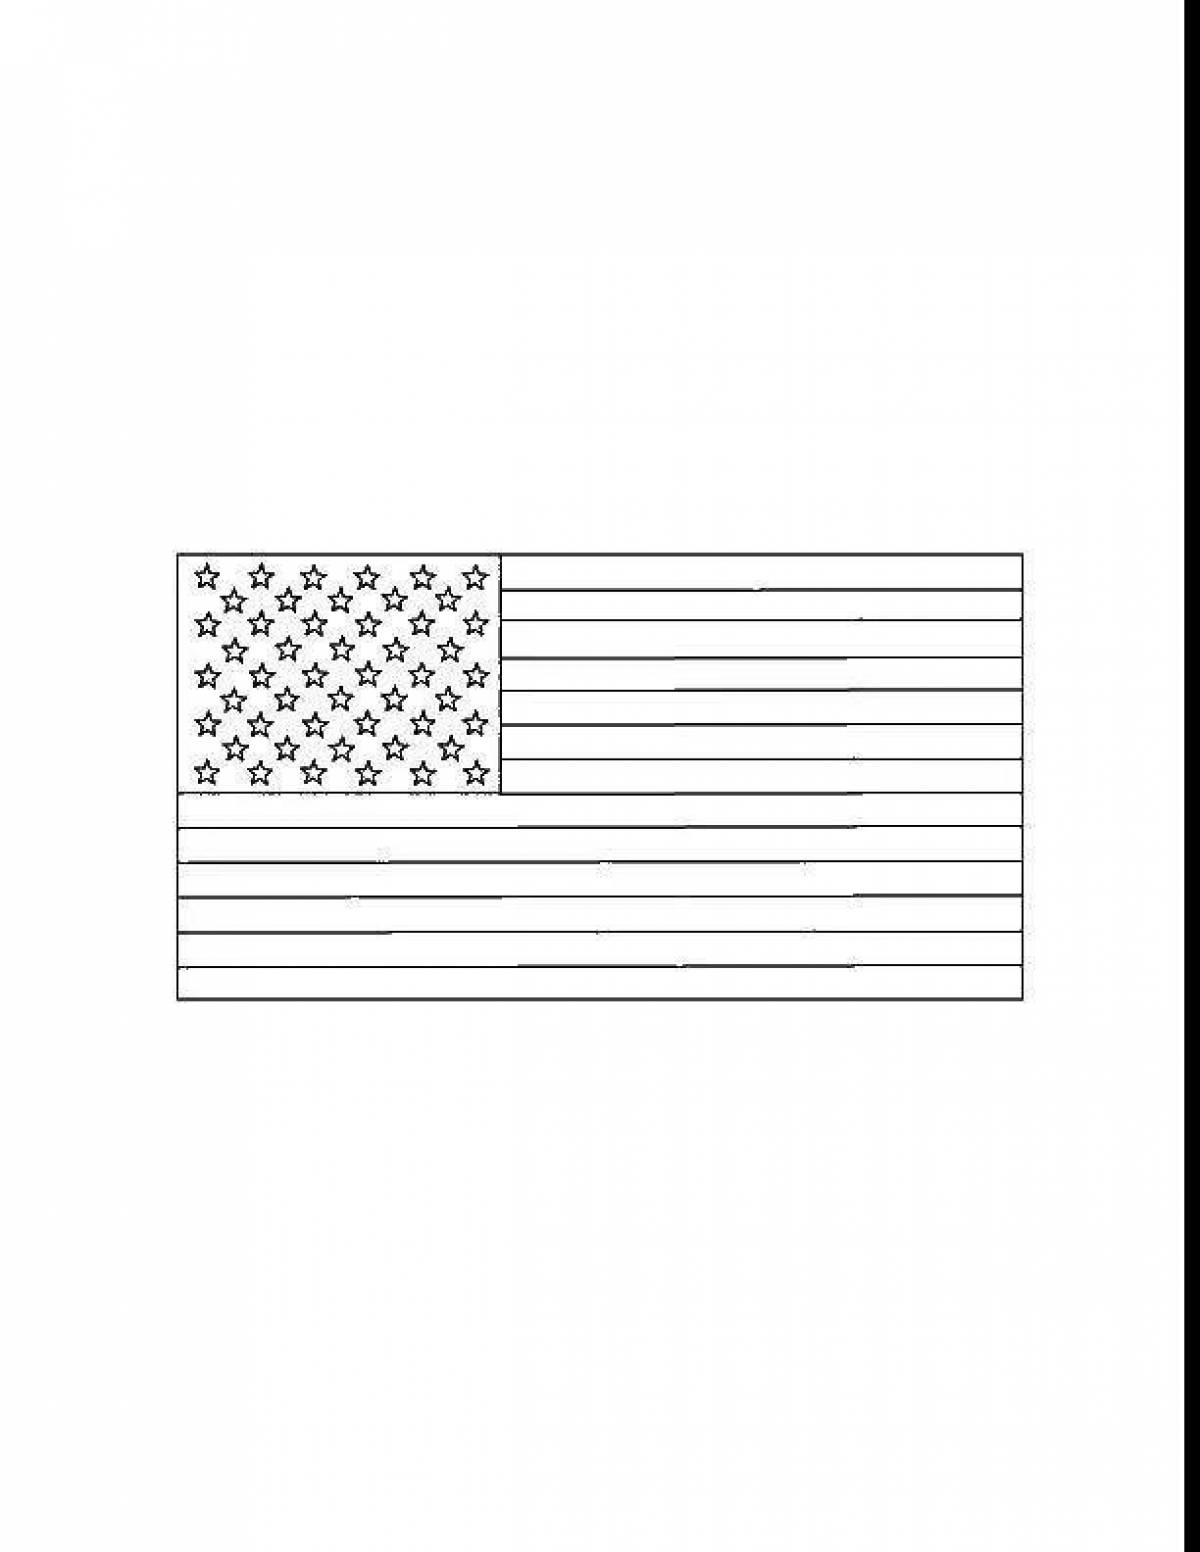 Flawless coloring of the American flag